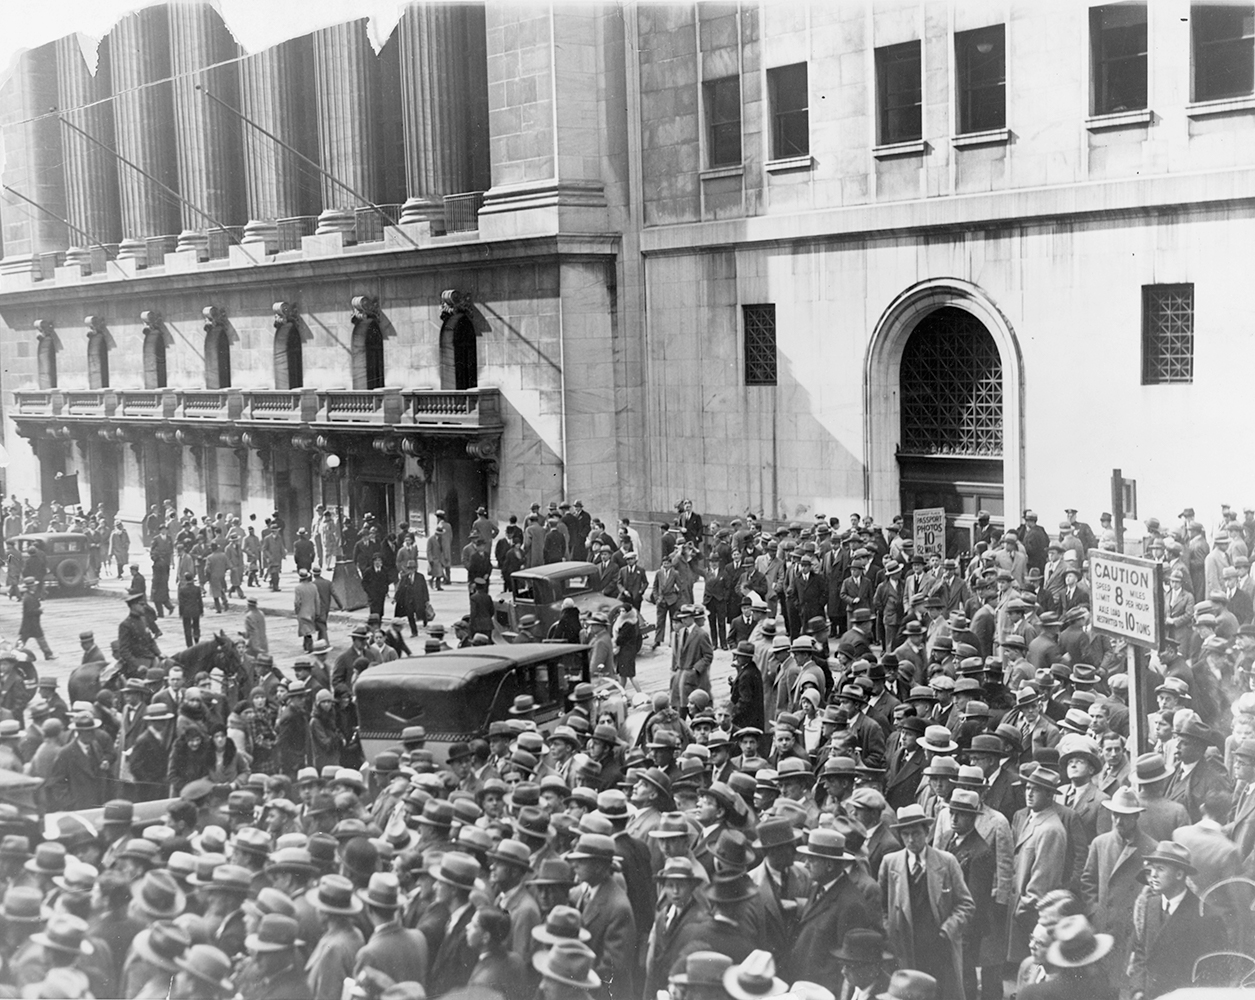 A large crowd of people crowd the street in the foreground. In the background is the New York Stock exchange building. Image link will enlarge image.